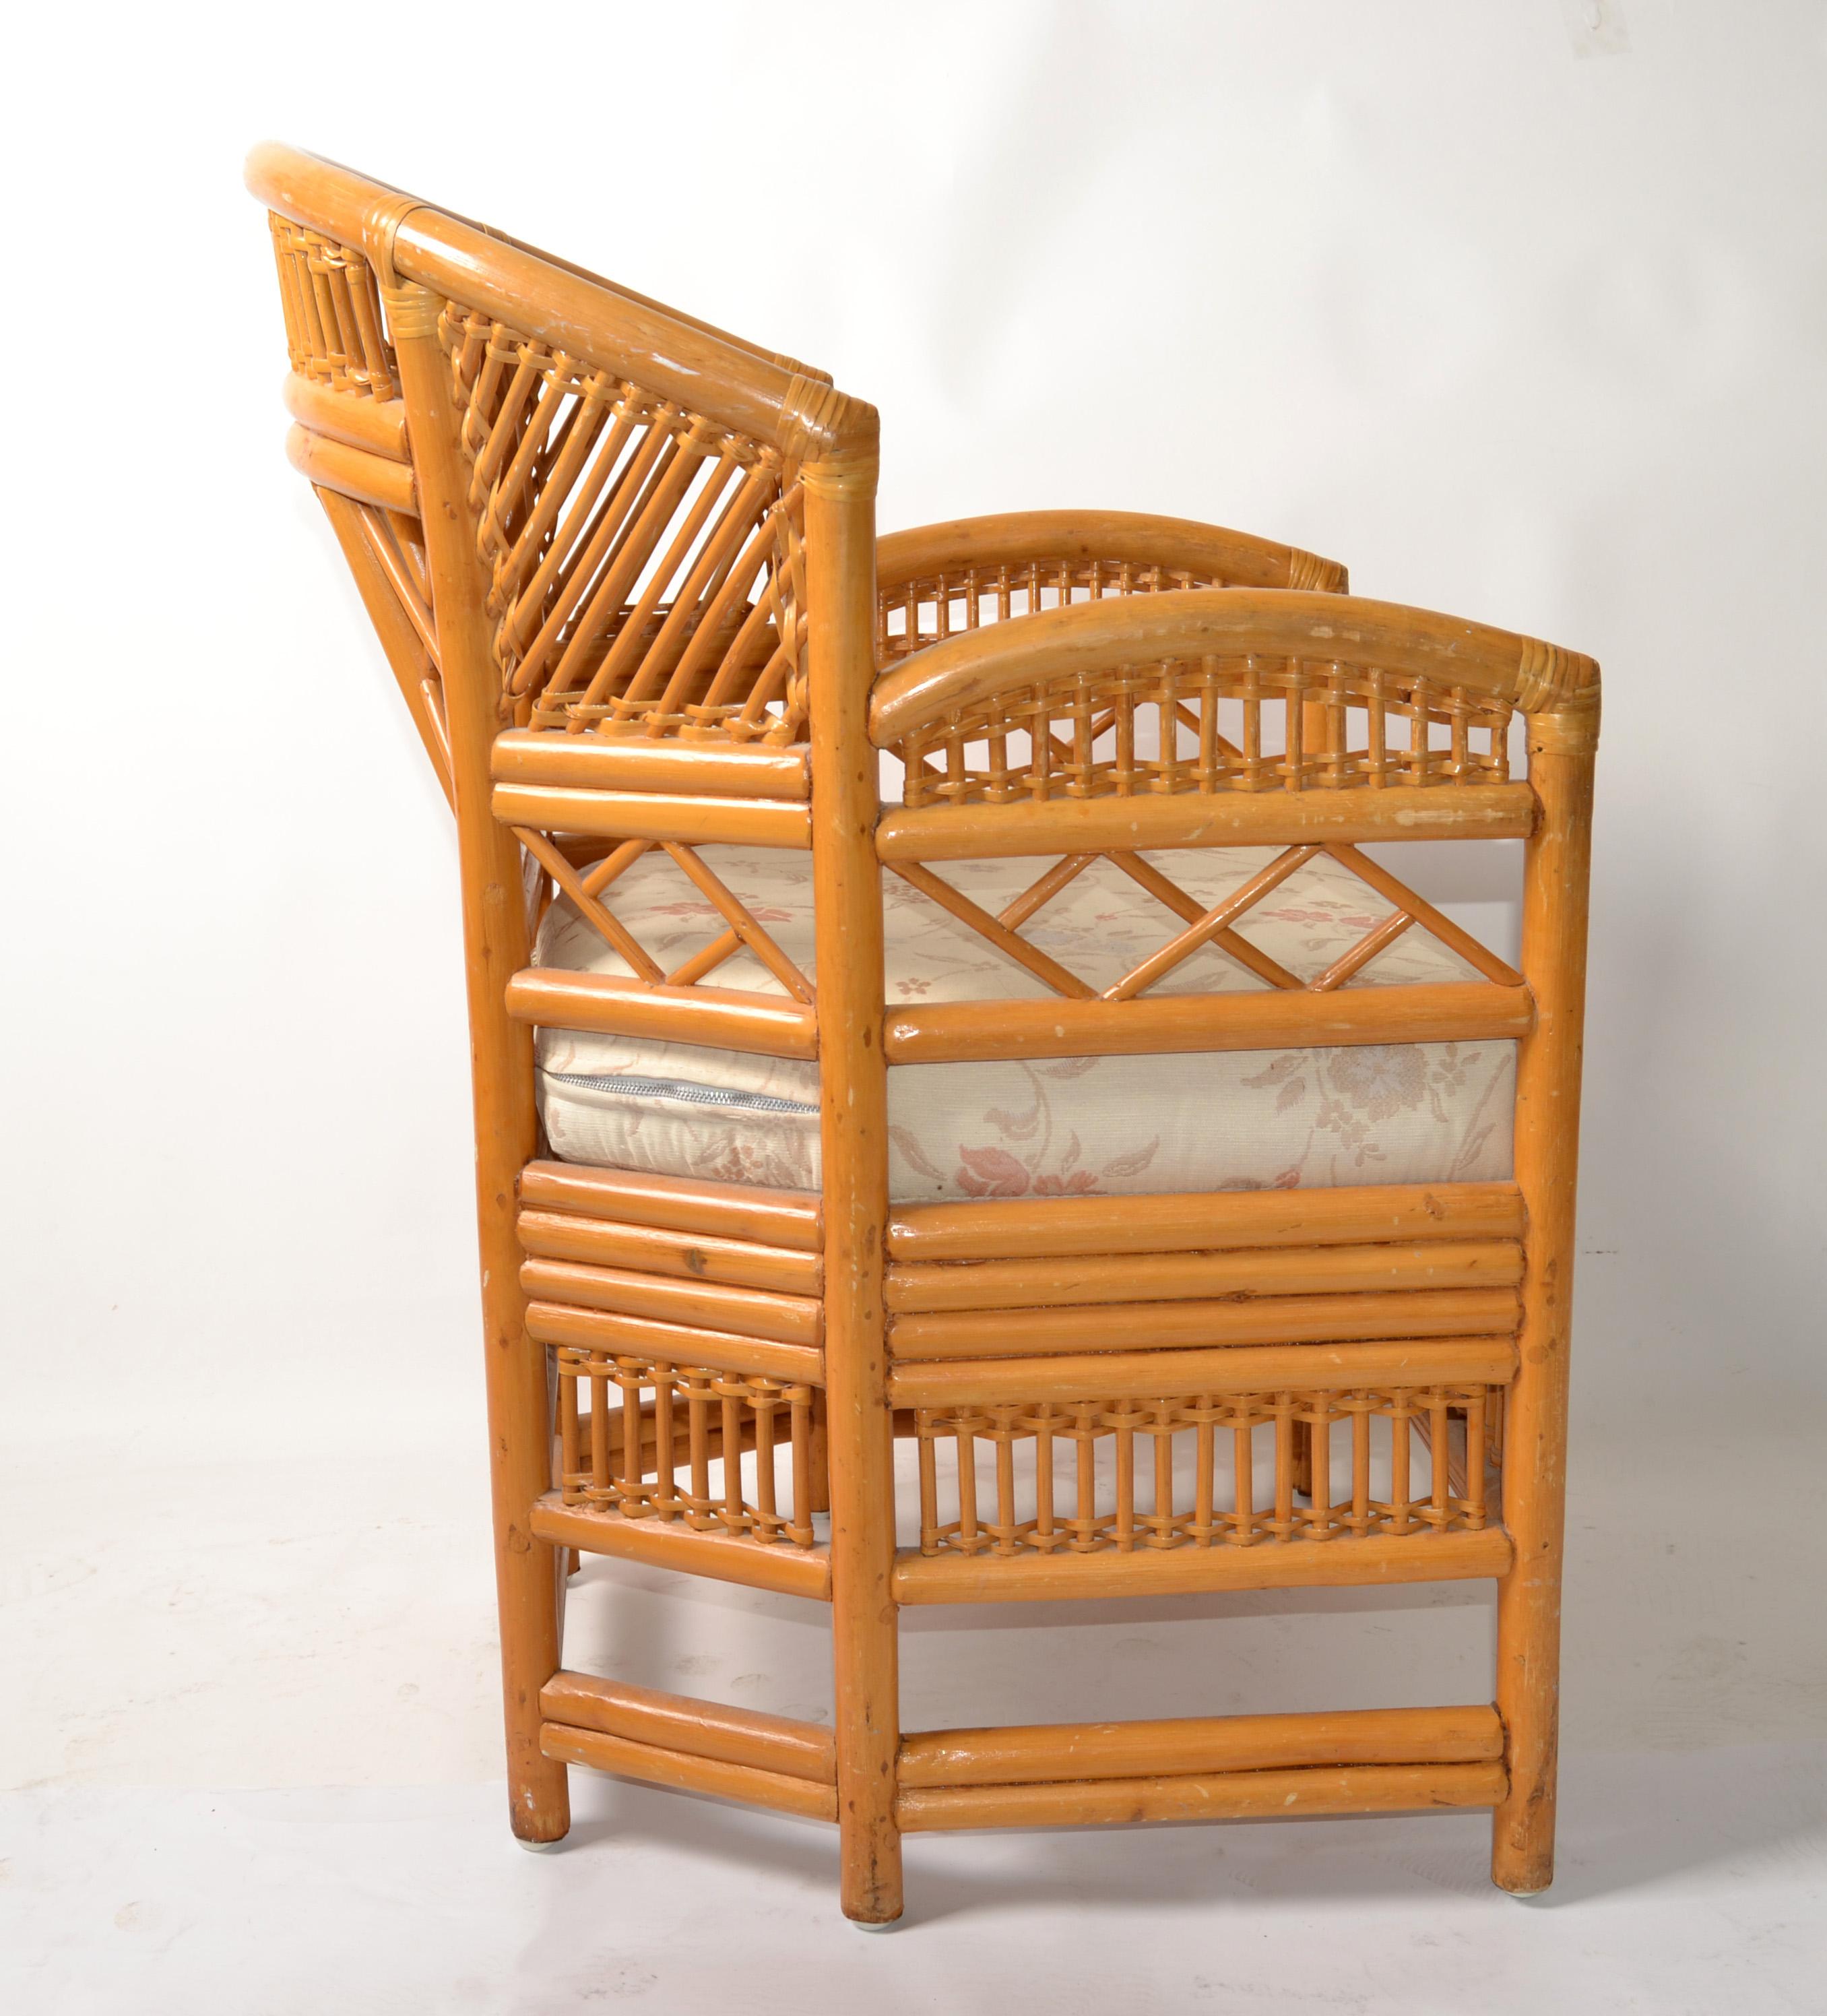 British Colonial Vintage Brighton Chinoiserie Rattan Blonde Bamboo Caning Split Reed Armchair 70s For Sale